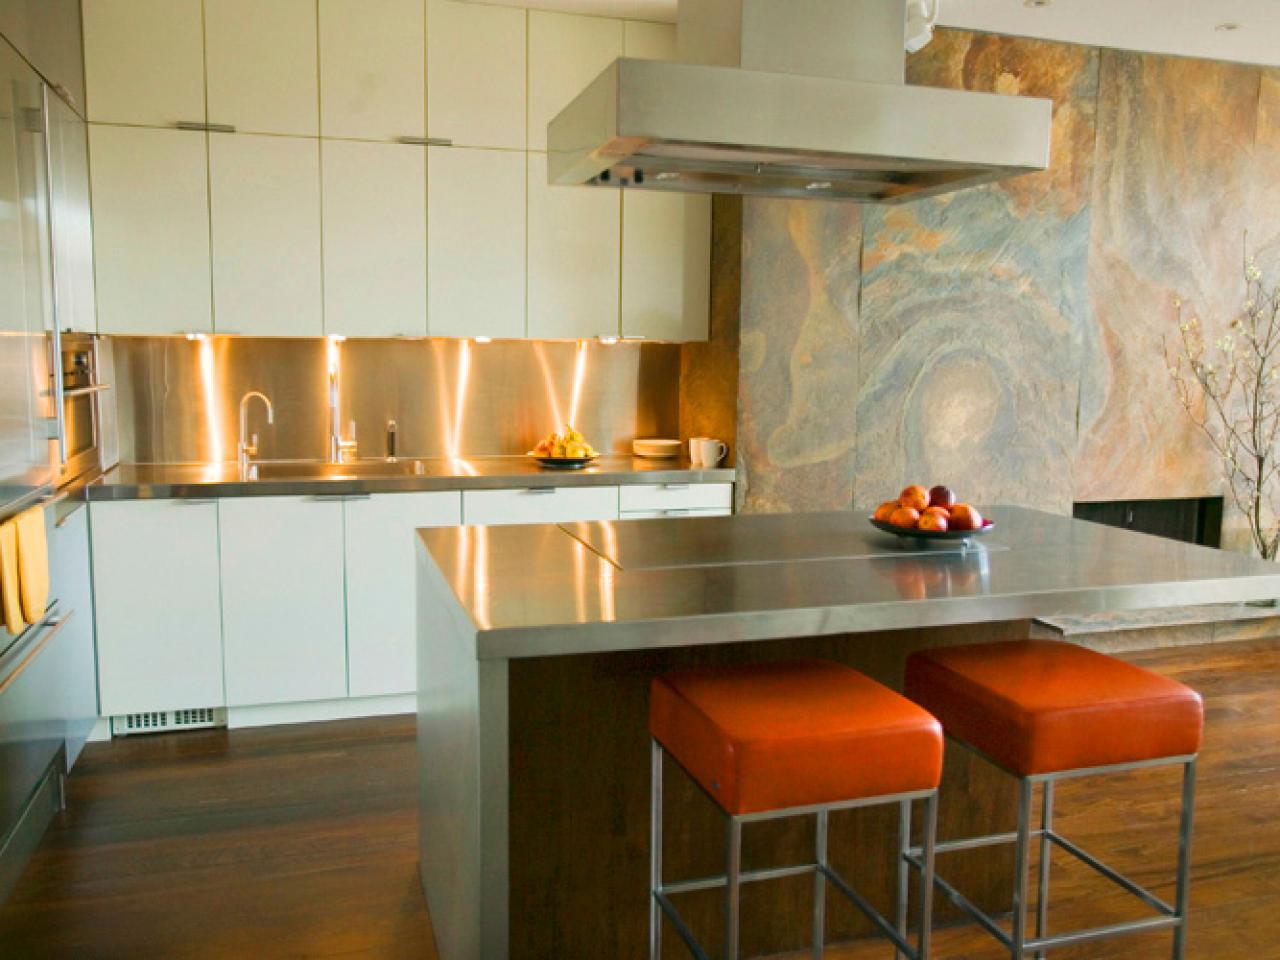 Stainless Steel Countertops Pictures Ideas From HGTV HGTV